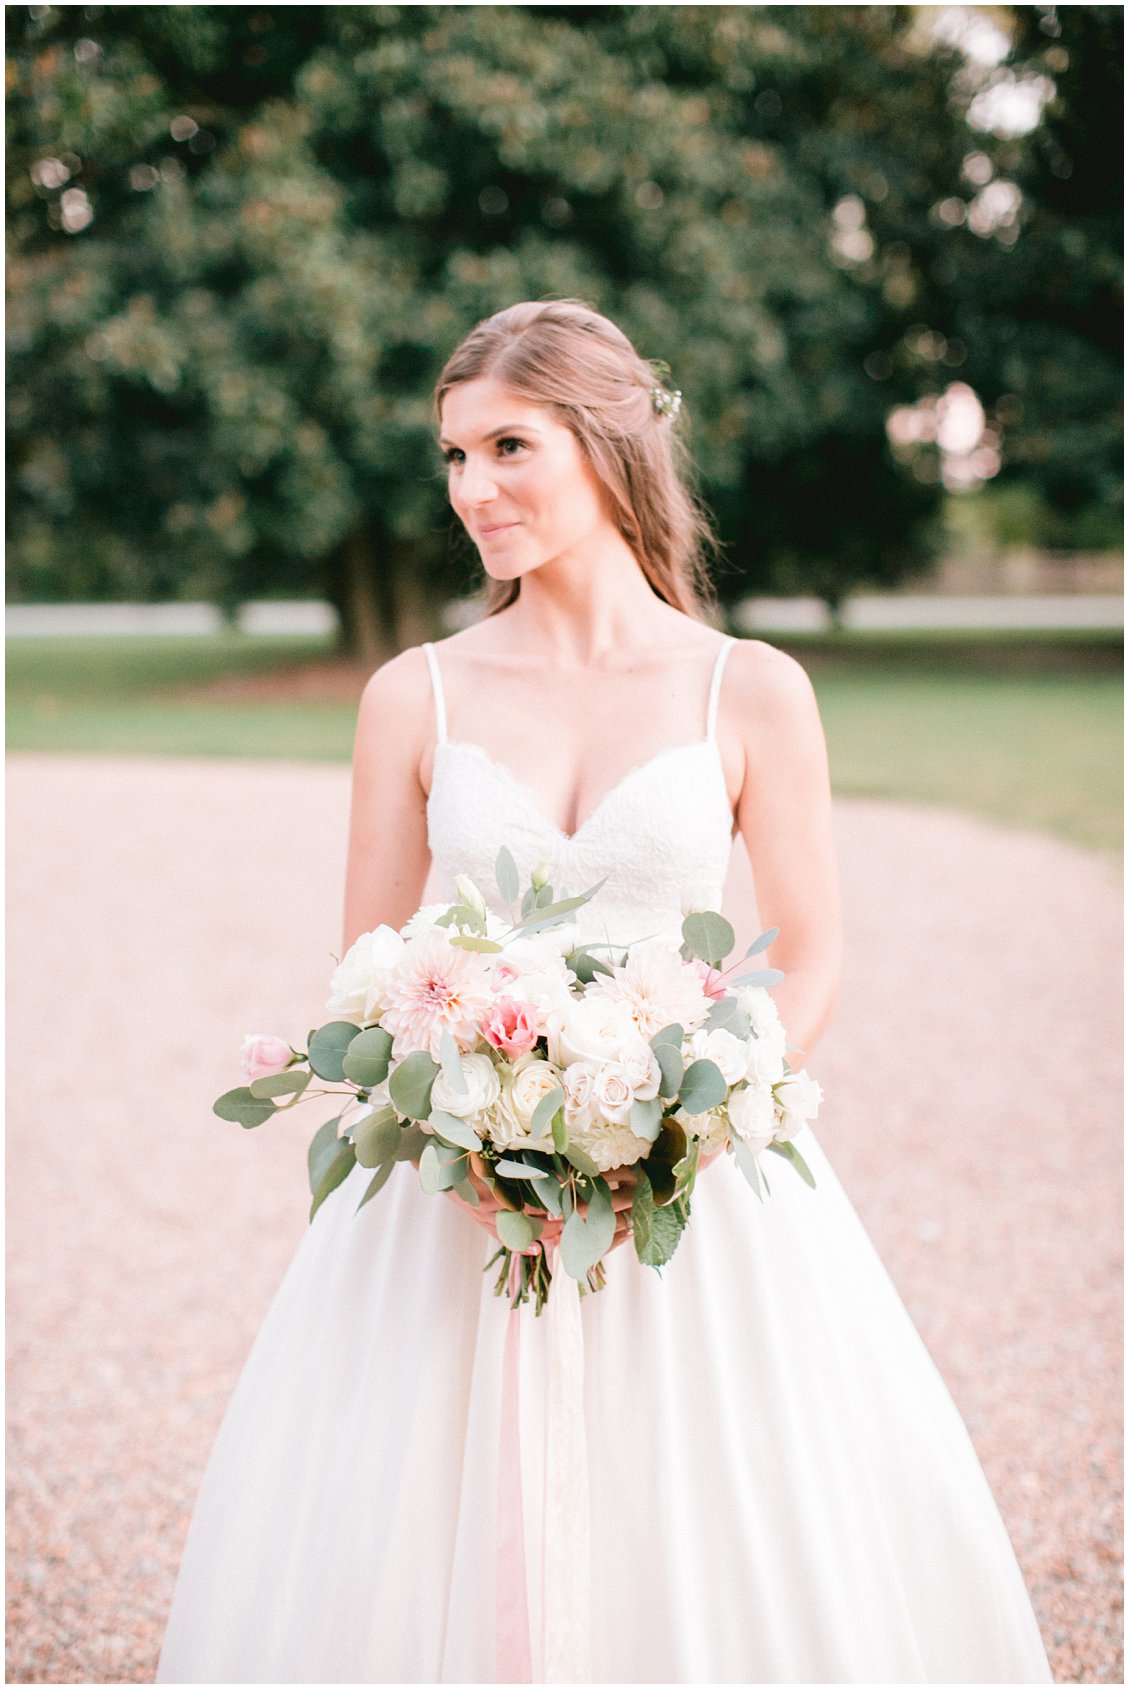 An elegant boho fall wedding at historic Seven Springs Farm & Manor in Richmond Virginia by husband and wife team Pattengale Photography